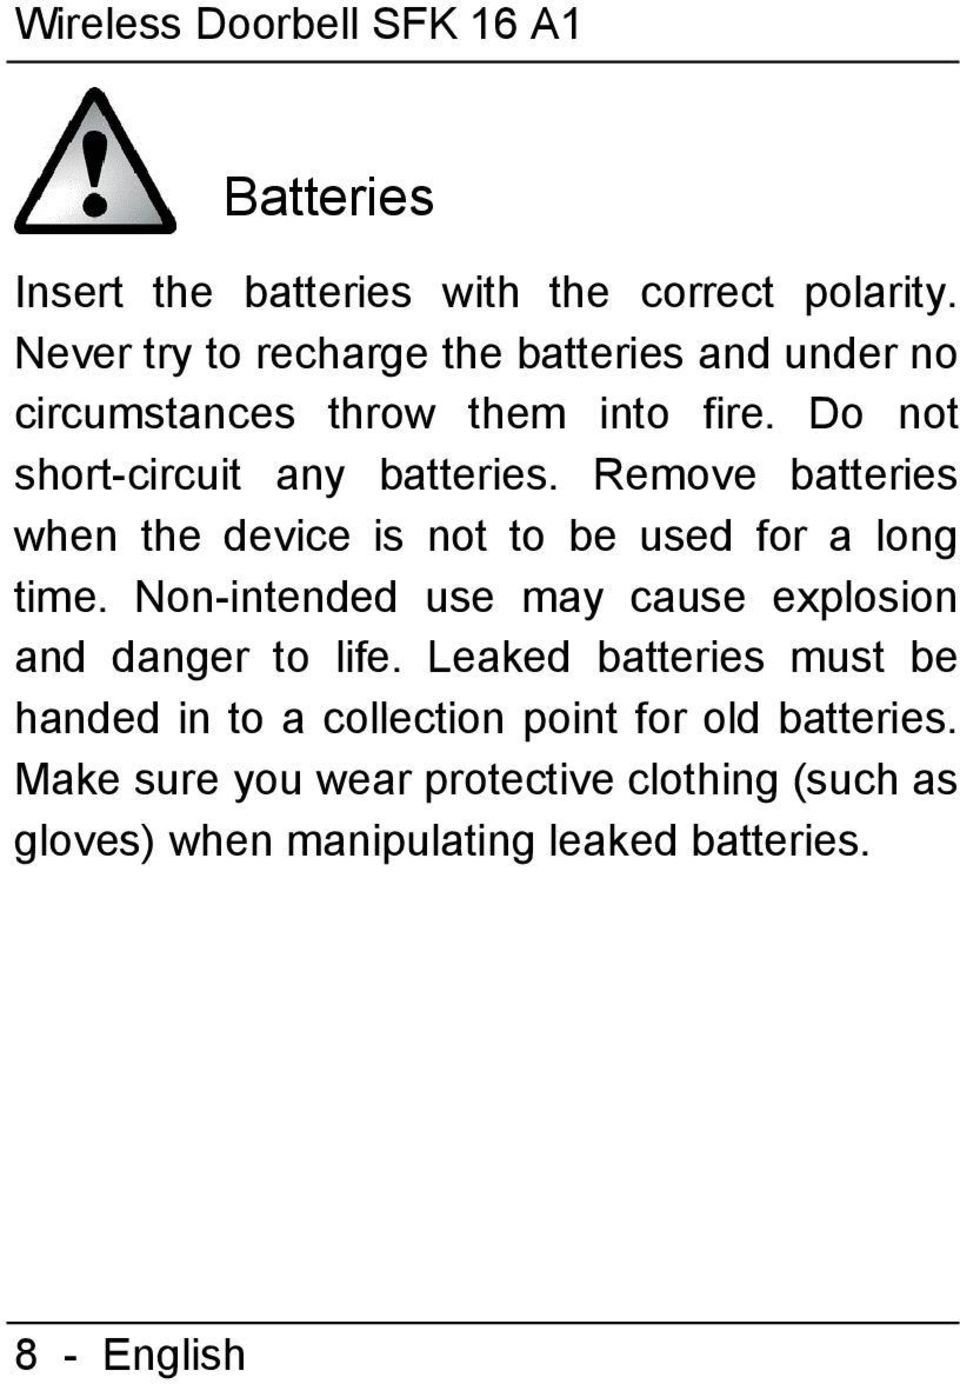 Remove batteries when the device is not to be used for a long time. Non-intended use may cause explosion and danger to life.